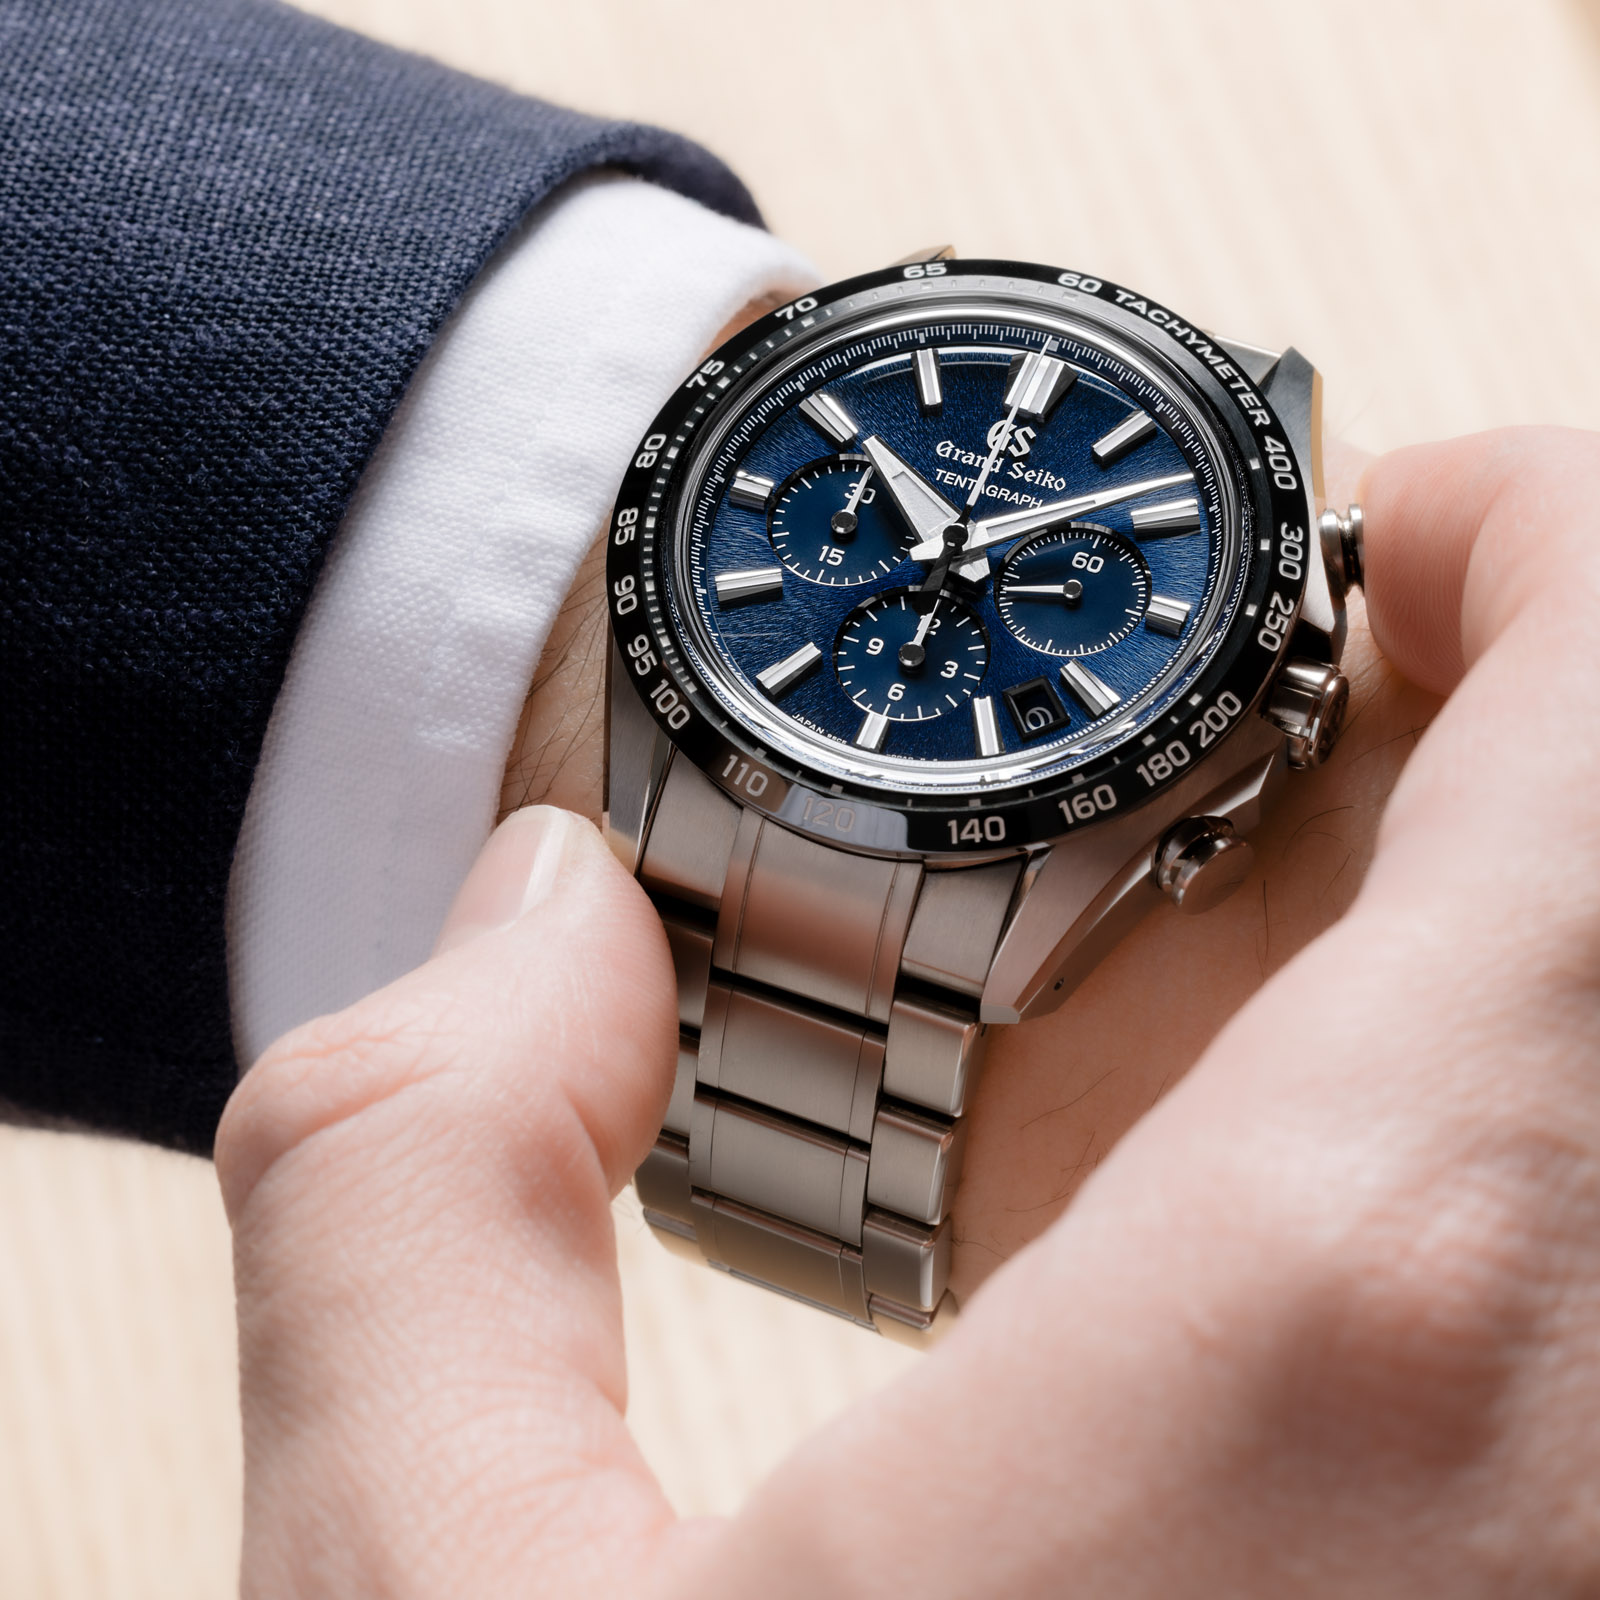 A high-precision chronograph with a resounding, tactile feel. 